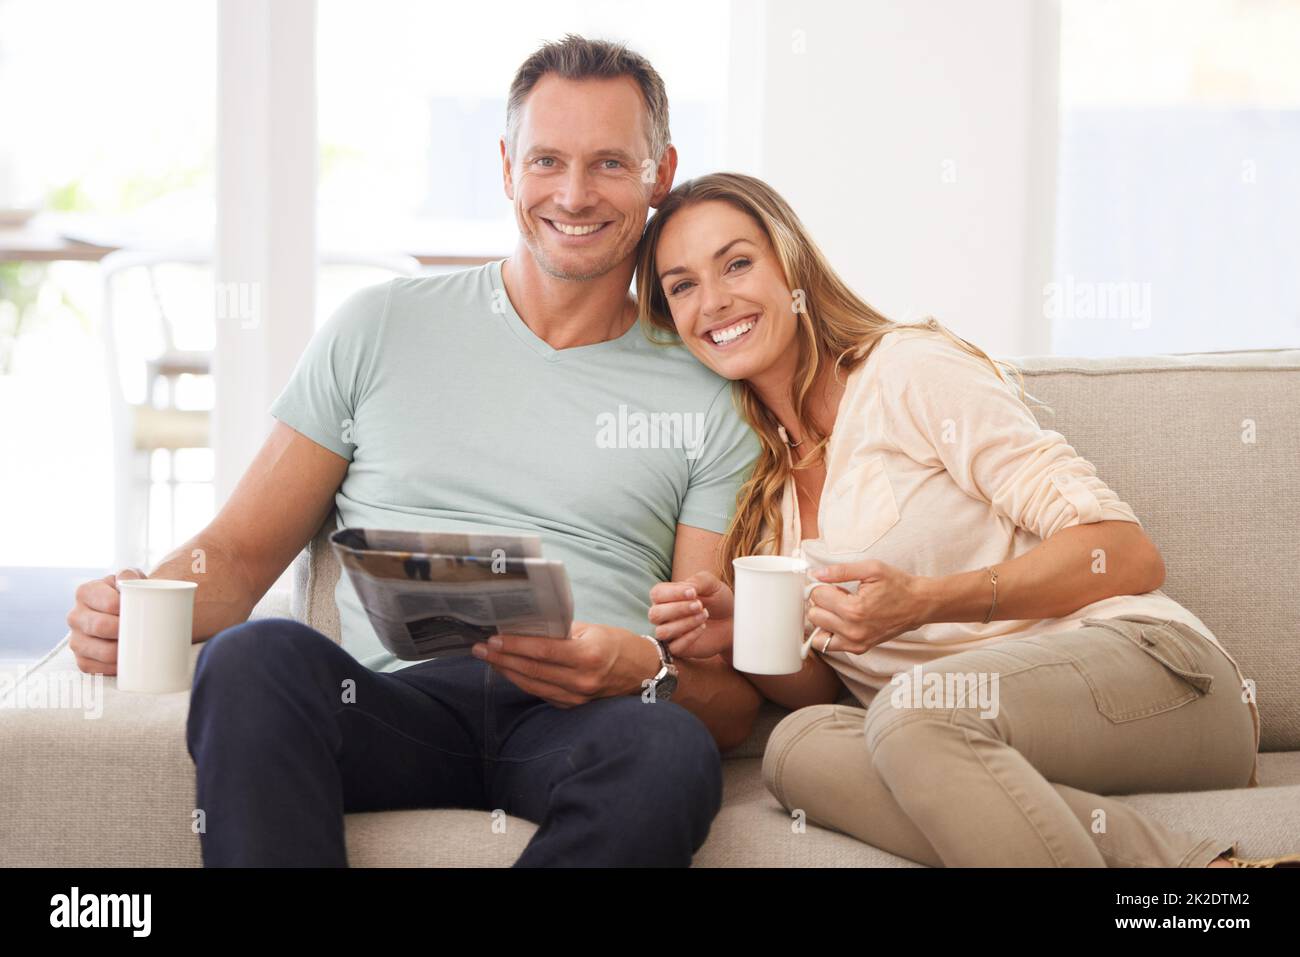 Sharing the morning paper. Portrait of a happily married couple reading the newspaper on their sofa. Stock Photo